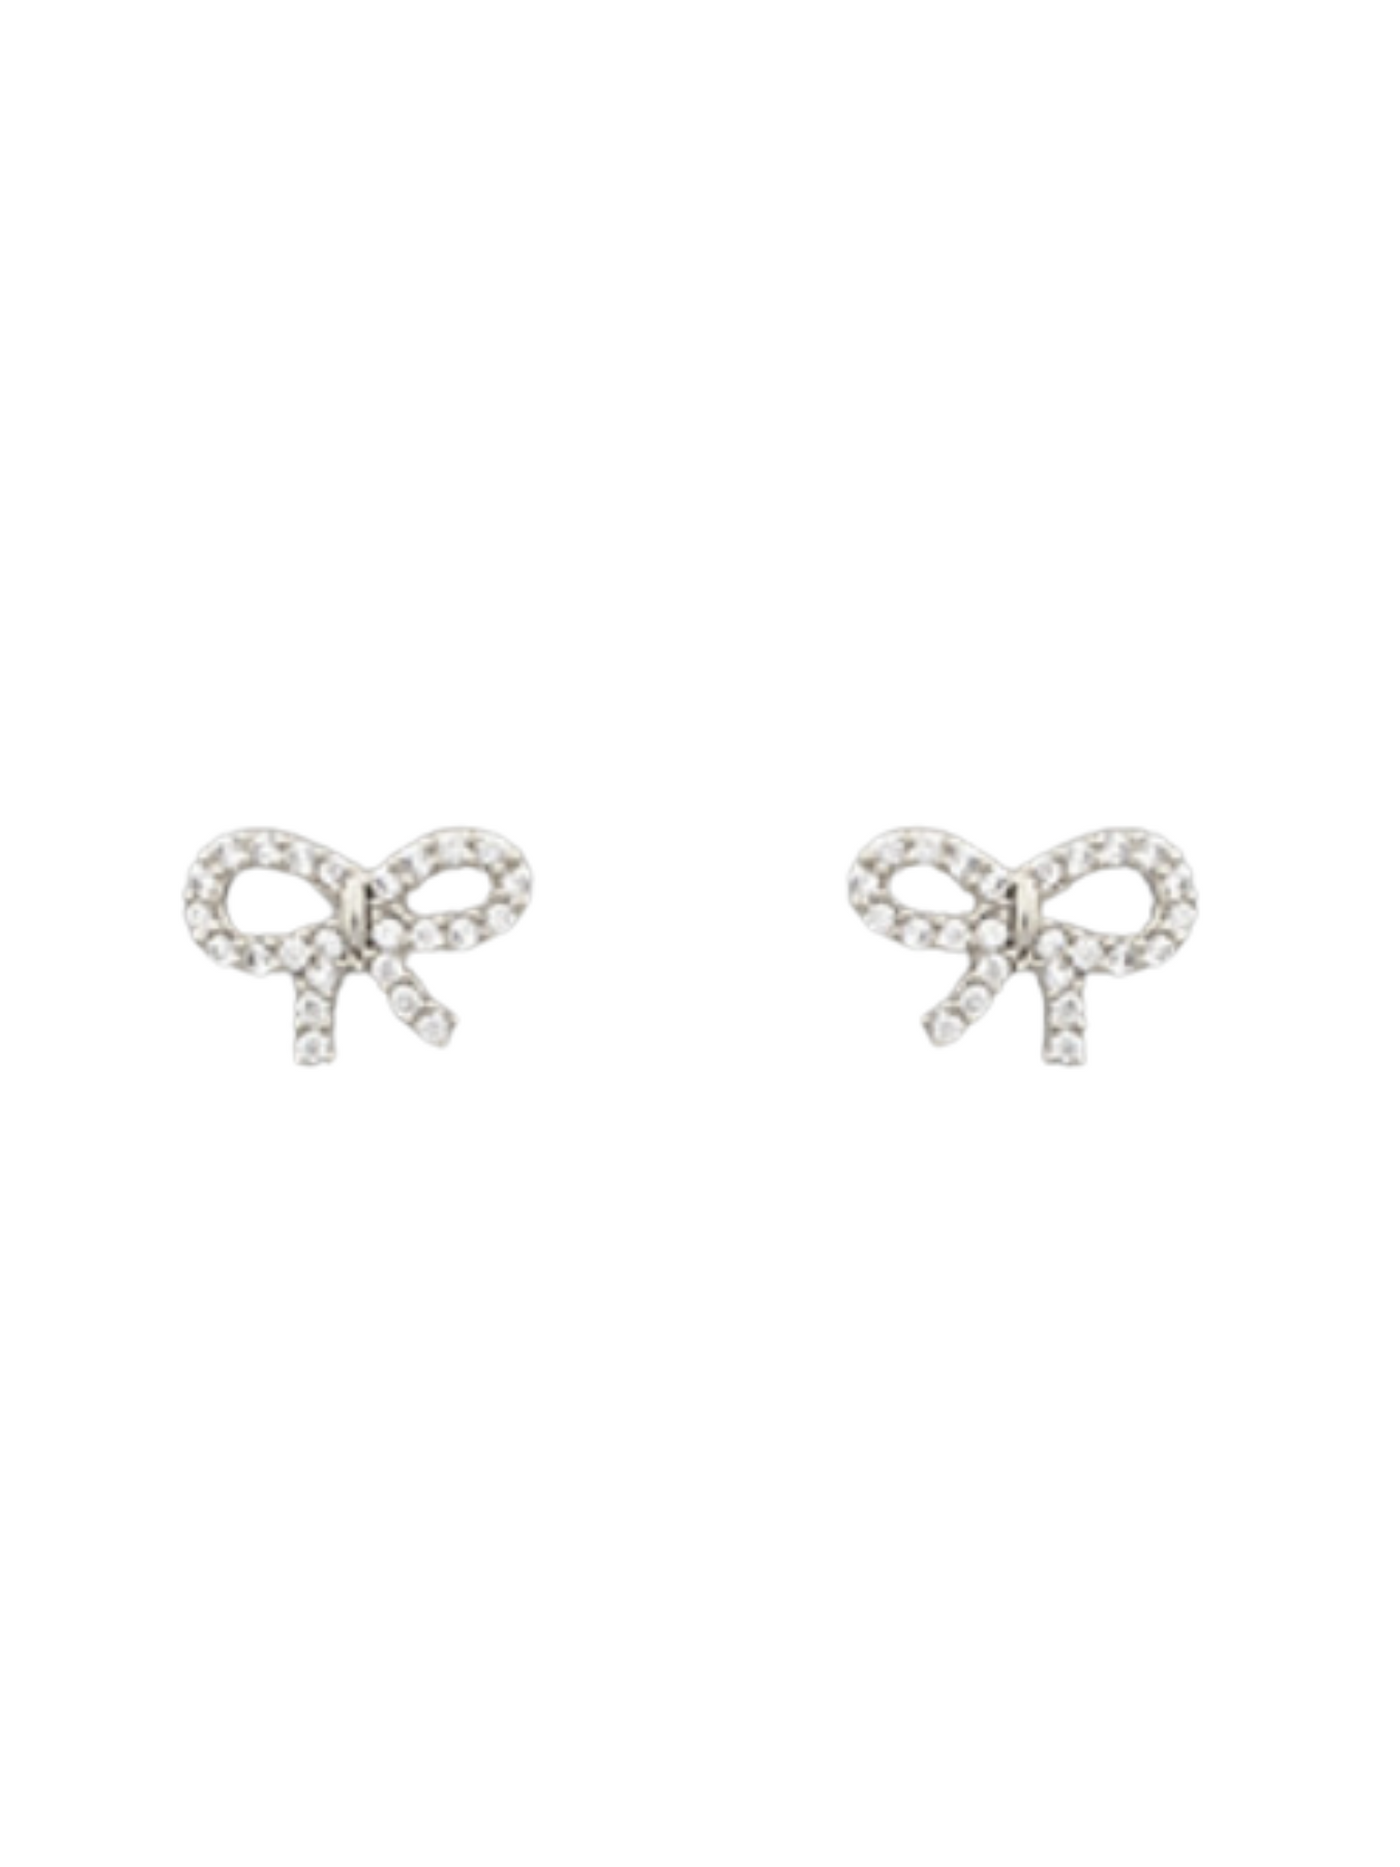 Crystal Bow Earrings in silver on white background.